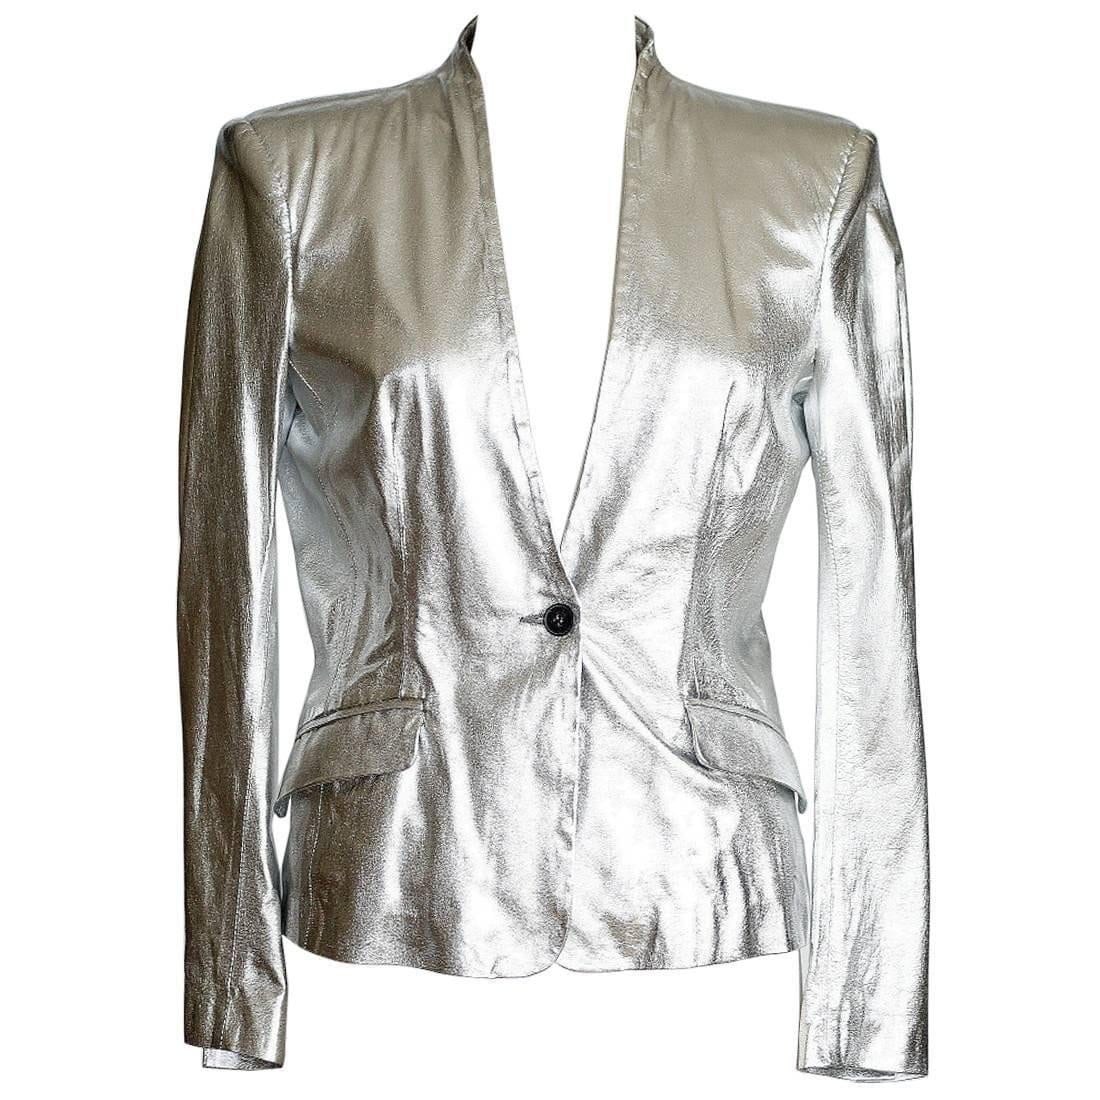 Pierre Balmain Jacket Ice Silver Light Weight Leather  42 / 8 nwt - mightychic